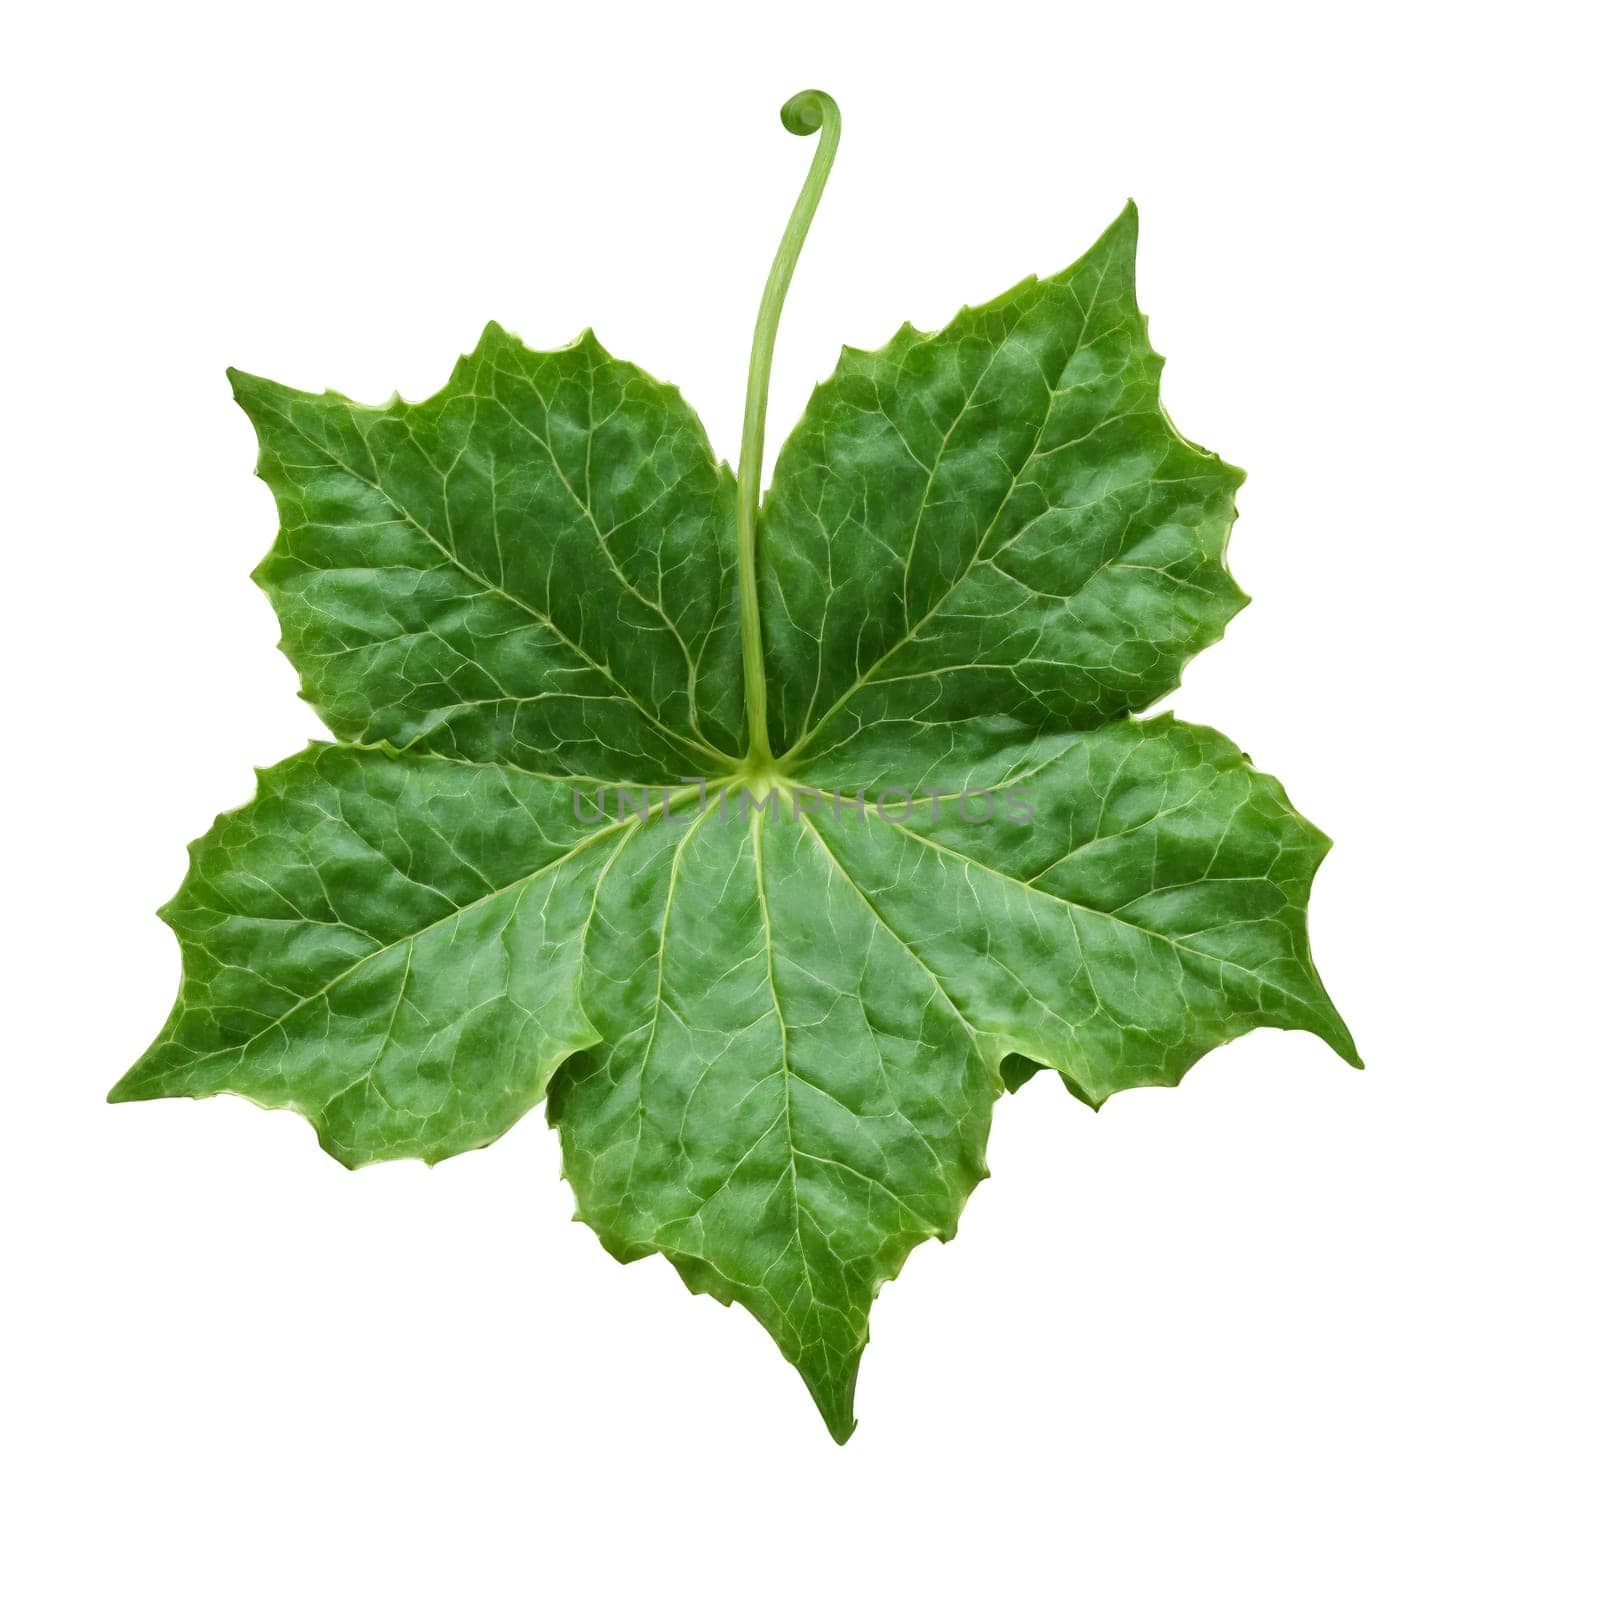 Ivy Leaf lobed green leaf with smooth edges and prominent veins curling at the edges. Plants isolated on transparent background.